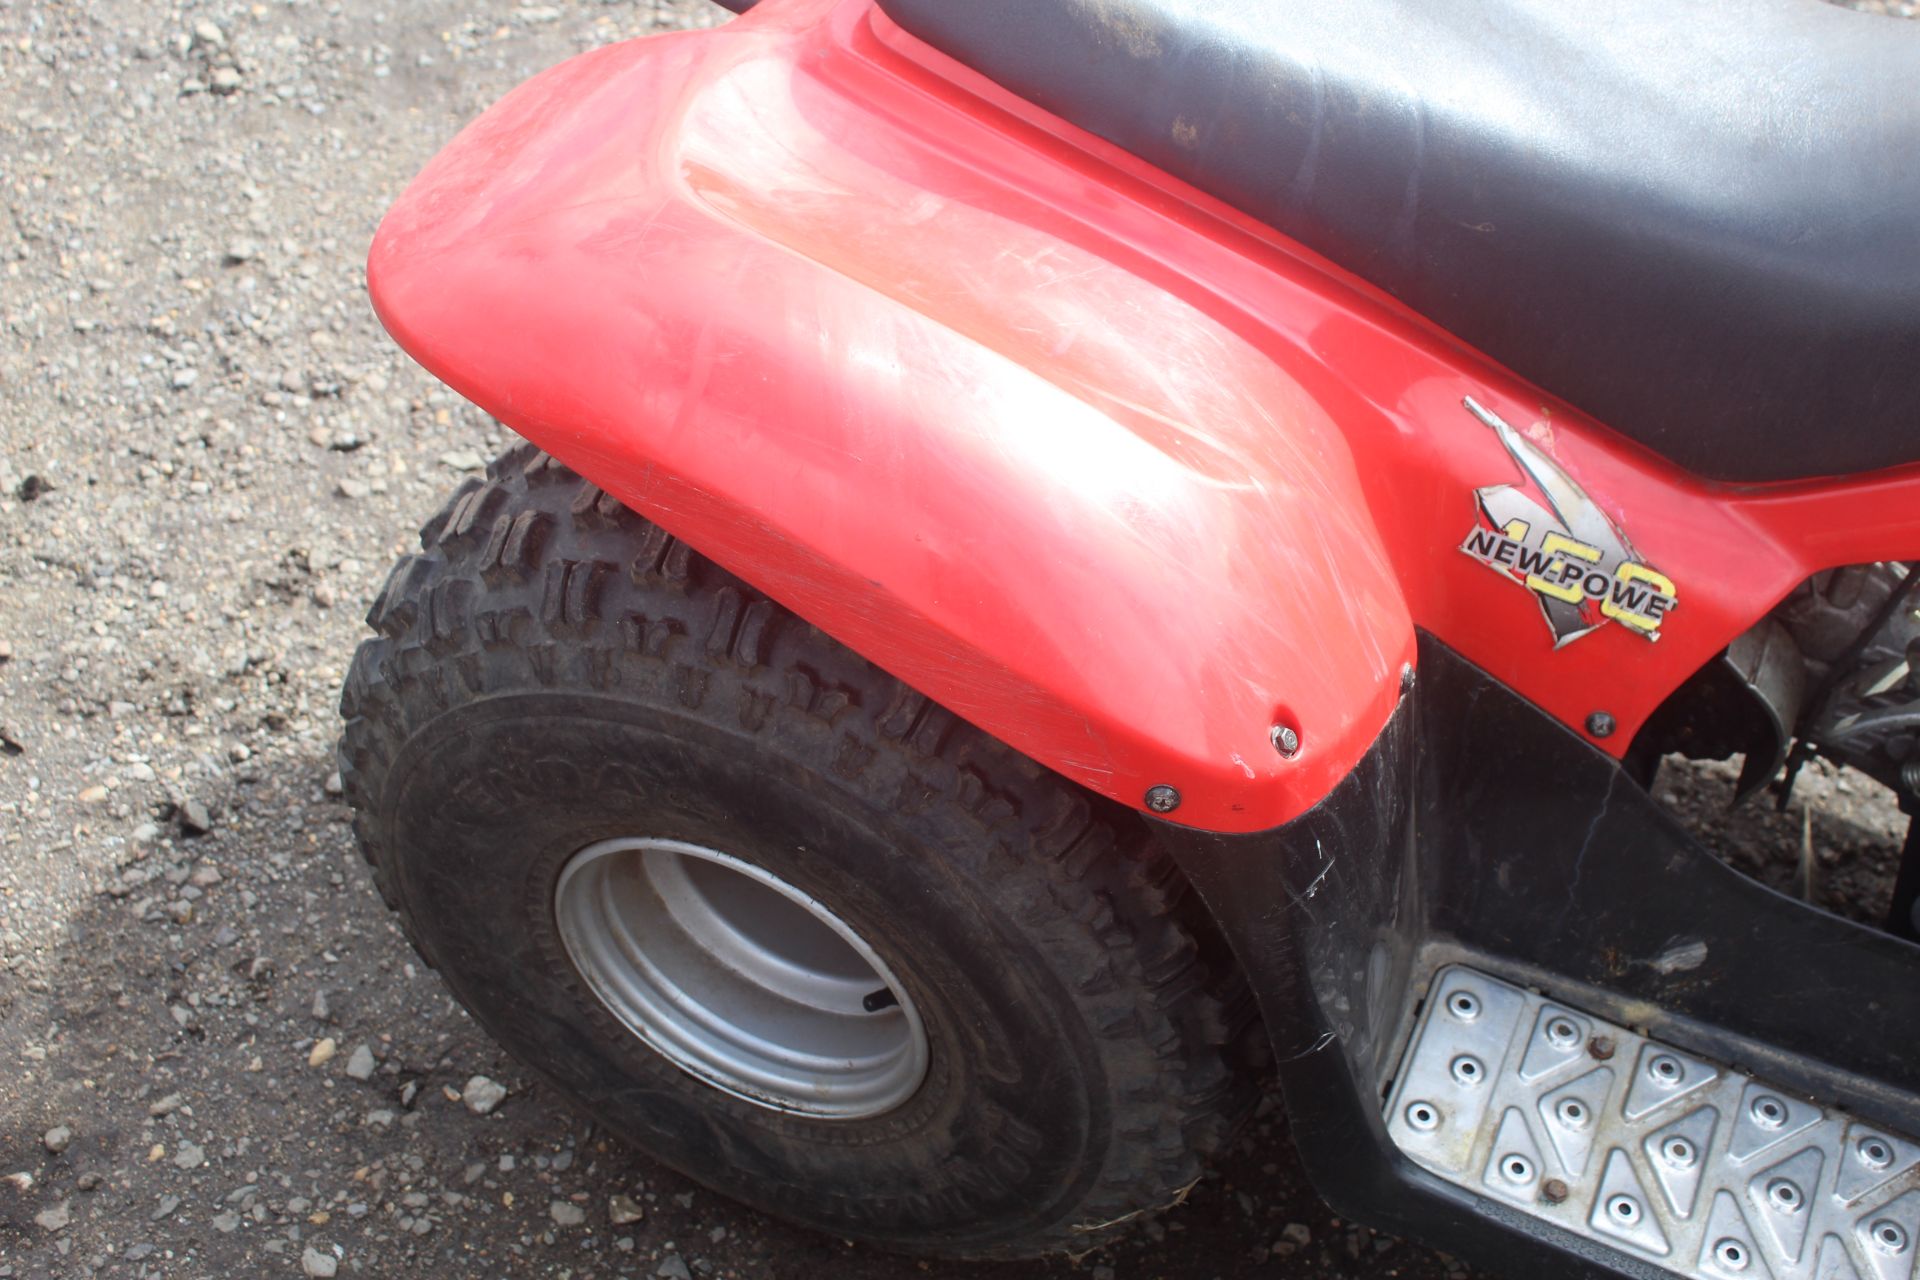 Kymco MX'er 150cc off road ATV. 2004. owned from new. Key, Manual held. - Image 12 of 18